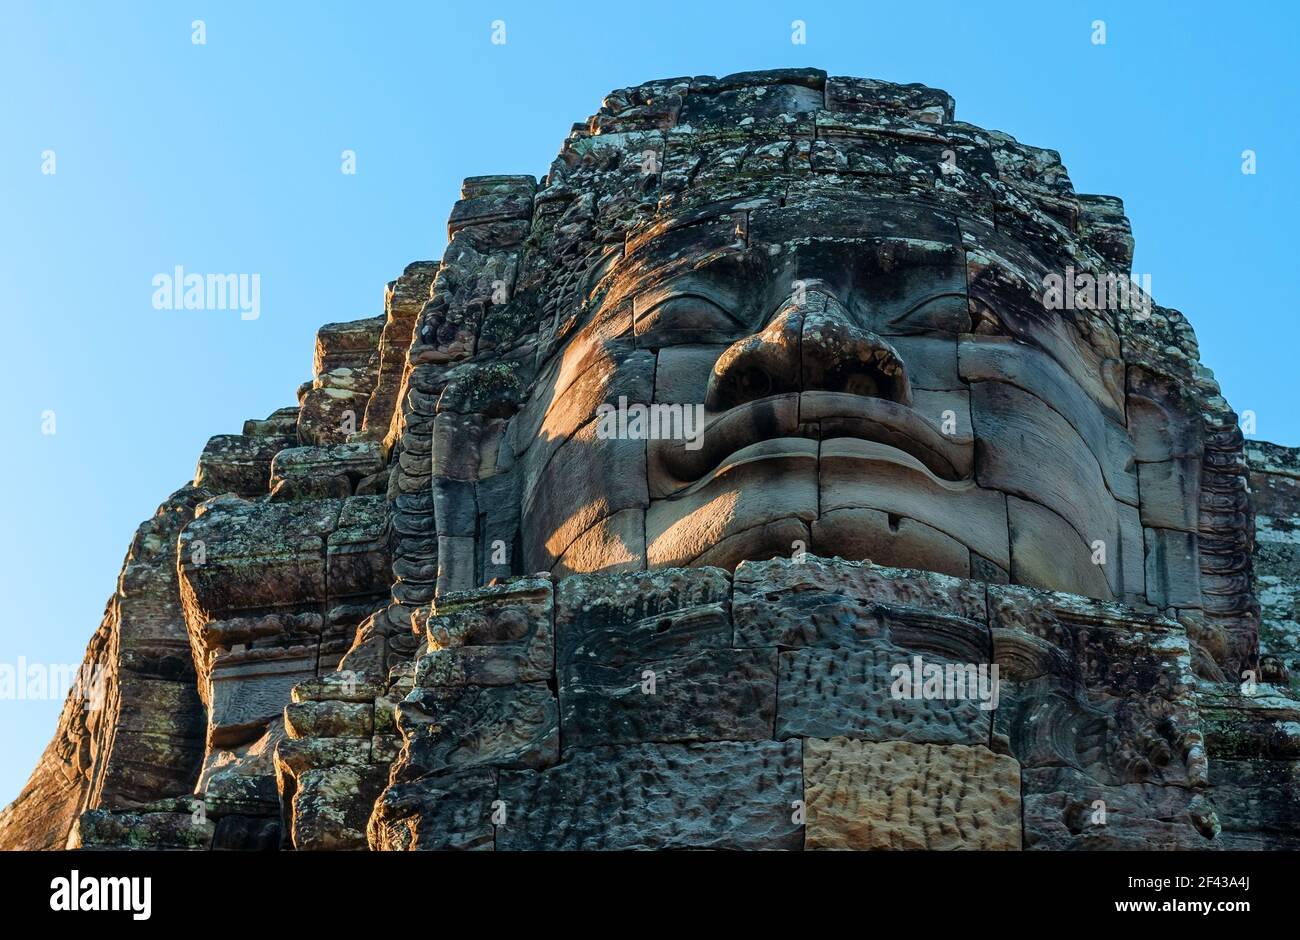 Stone sculpture of a bodhisattva or Buddha face in the Bayon Temple, Angkor Thom, Cambodia. Stock Photo